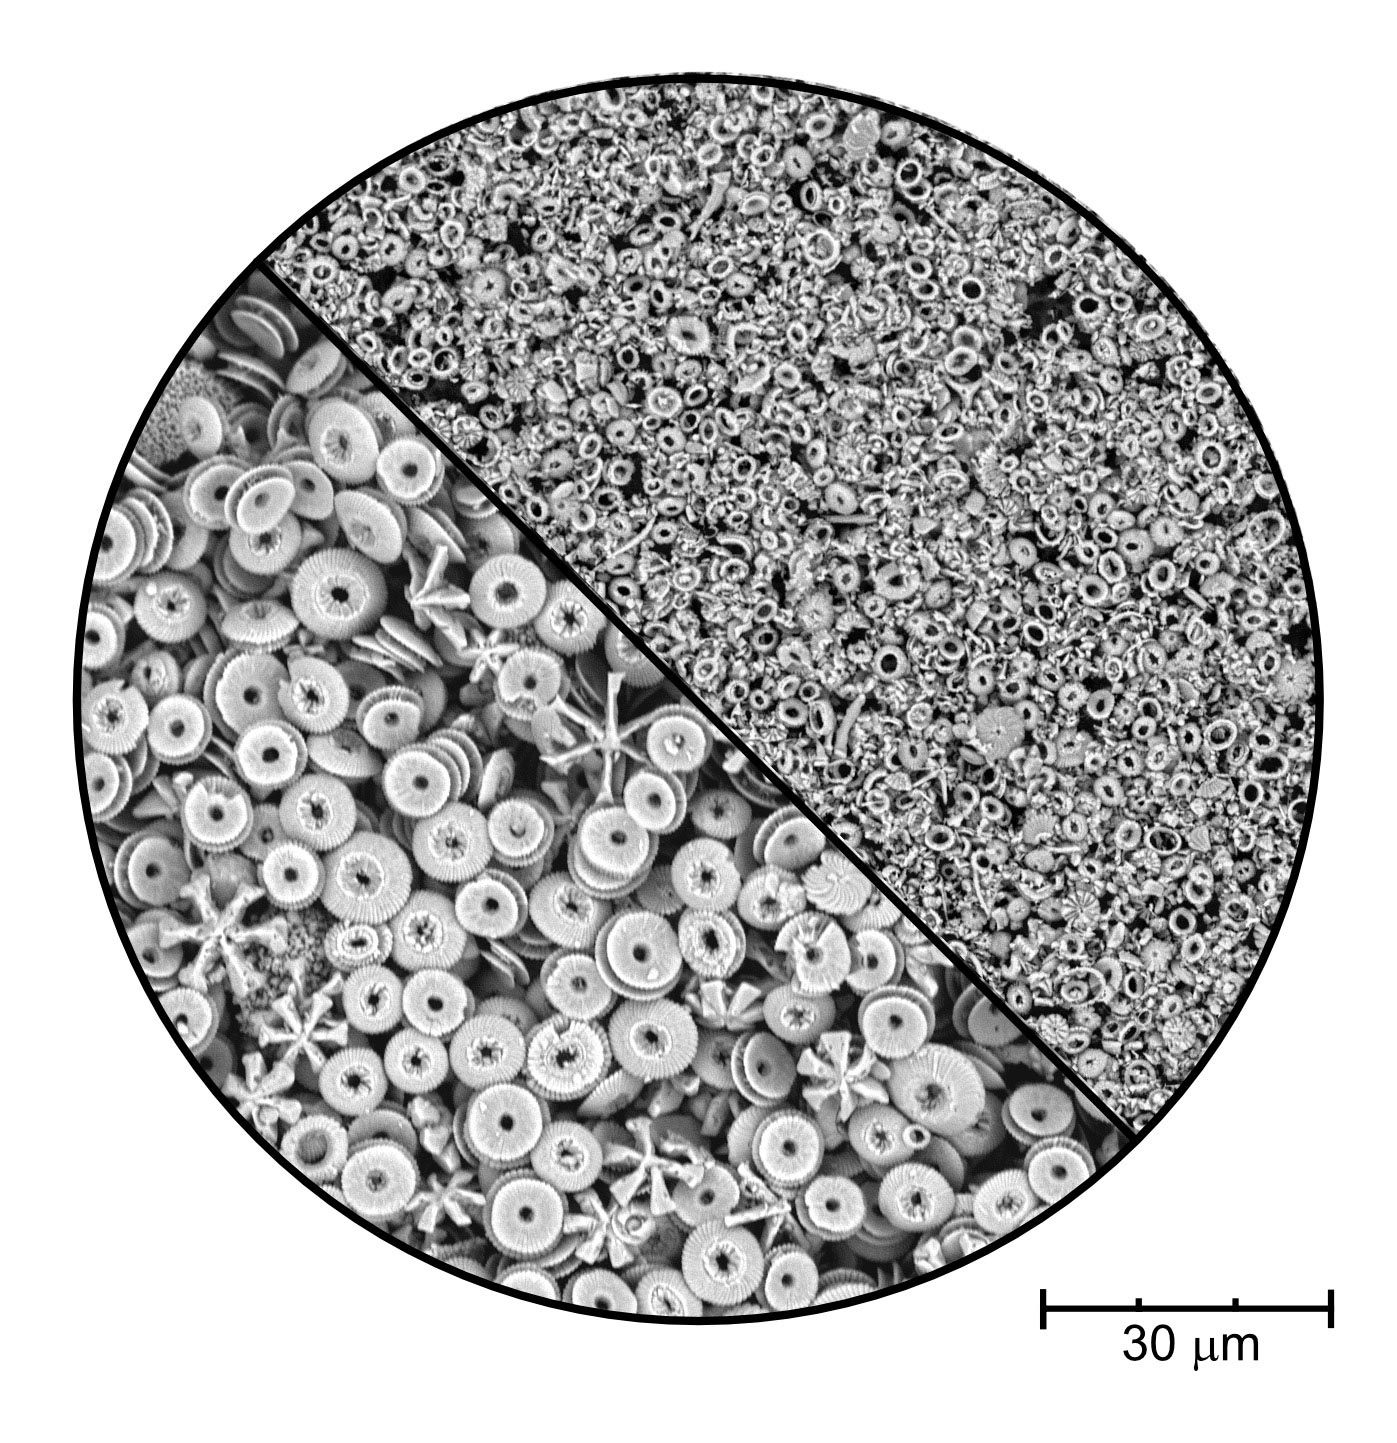 Example of size variation of coccoliths across different time periods - Miocene (left), Pleistocene (right). (Weimin Si)